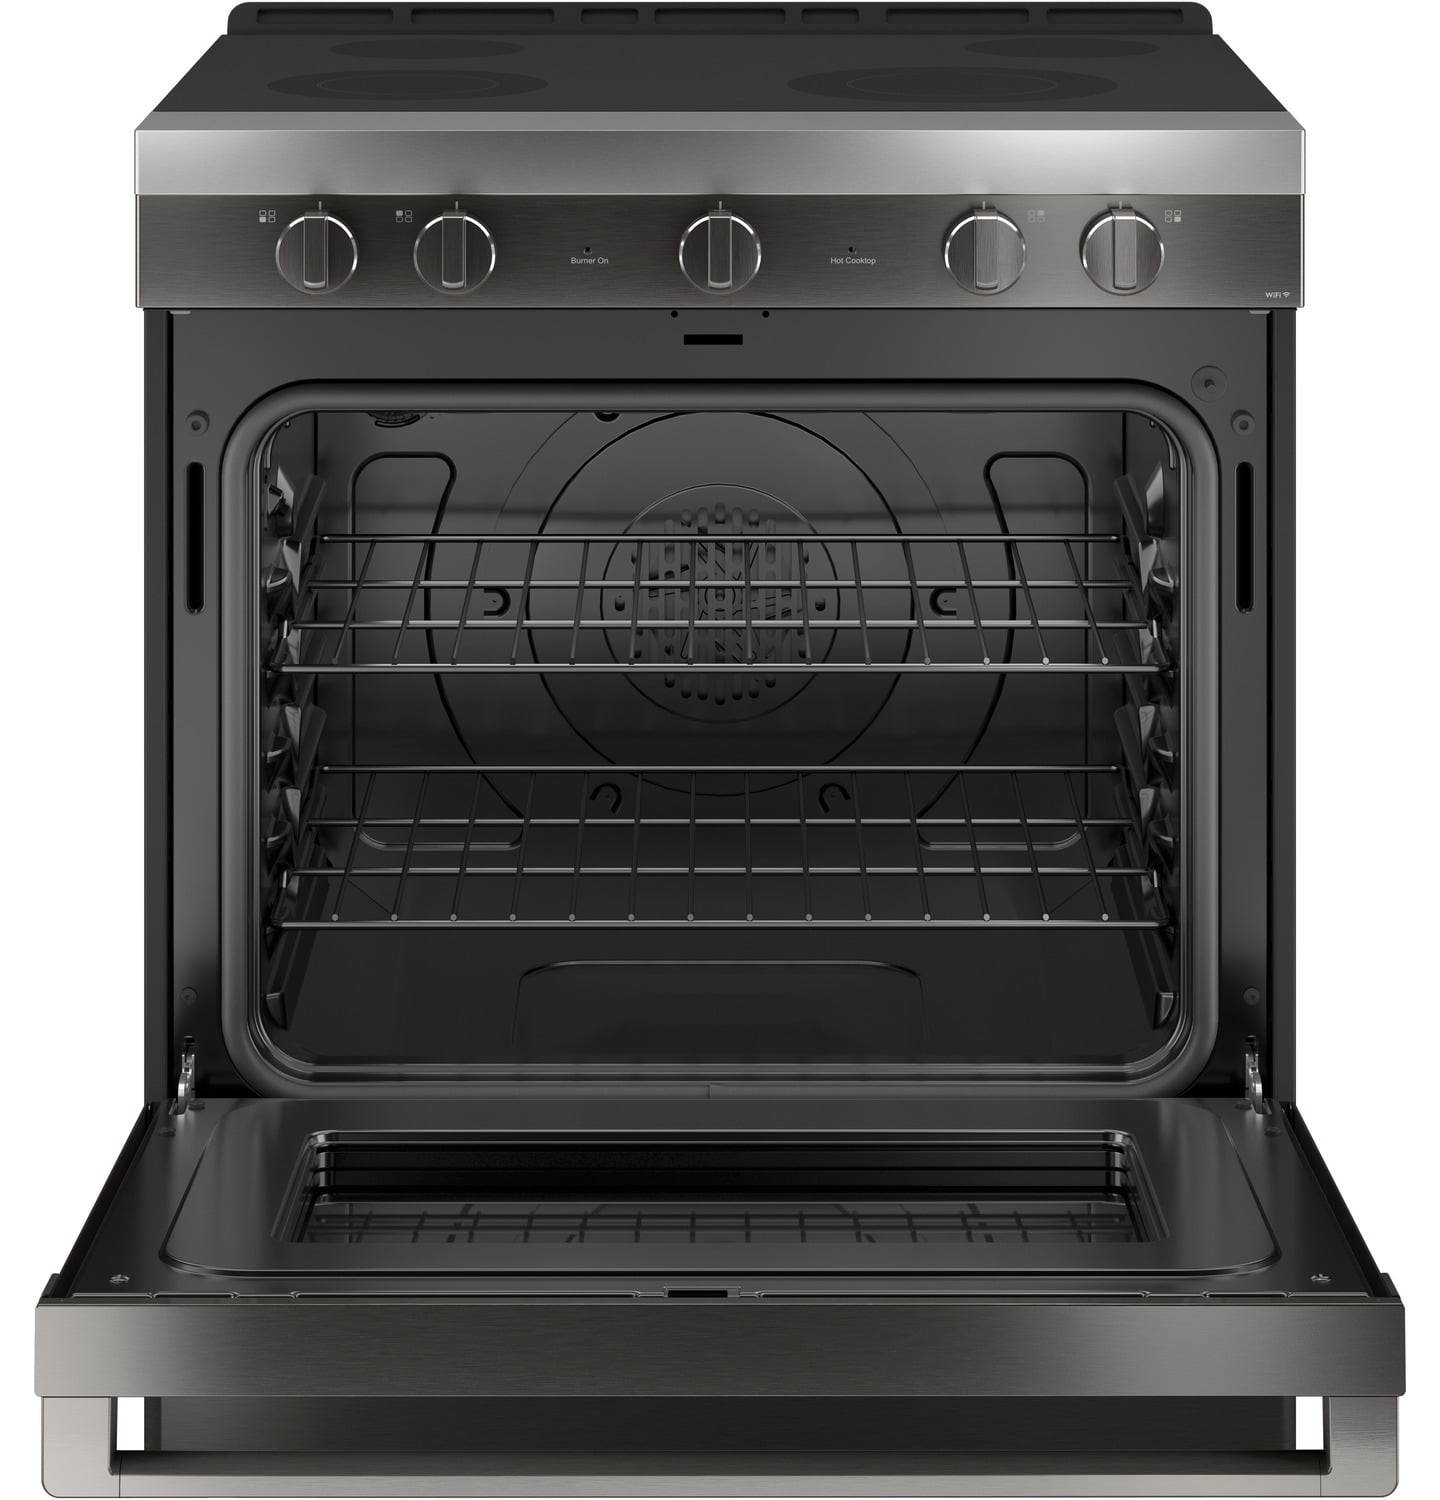 Haier QSS740BNTS 30" Smart Slide-In Electric Range With Convection